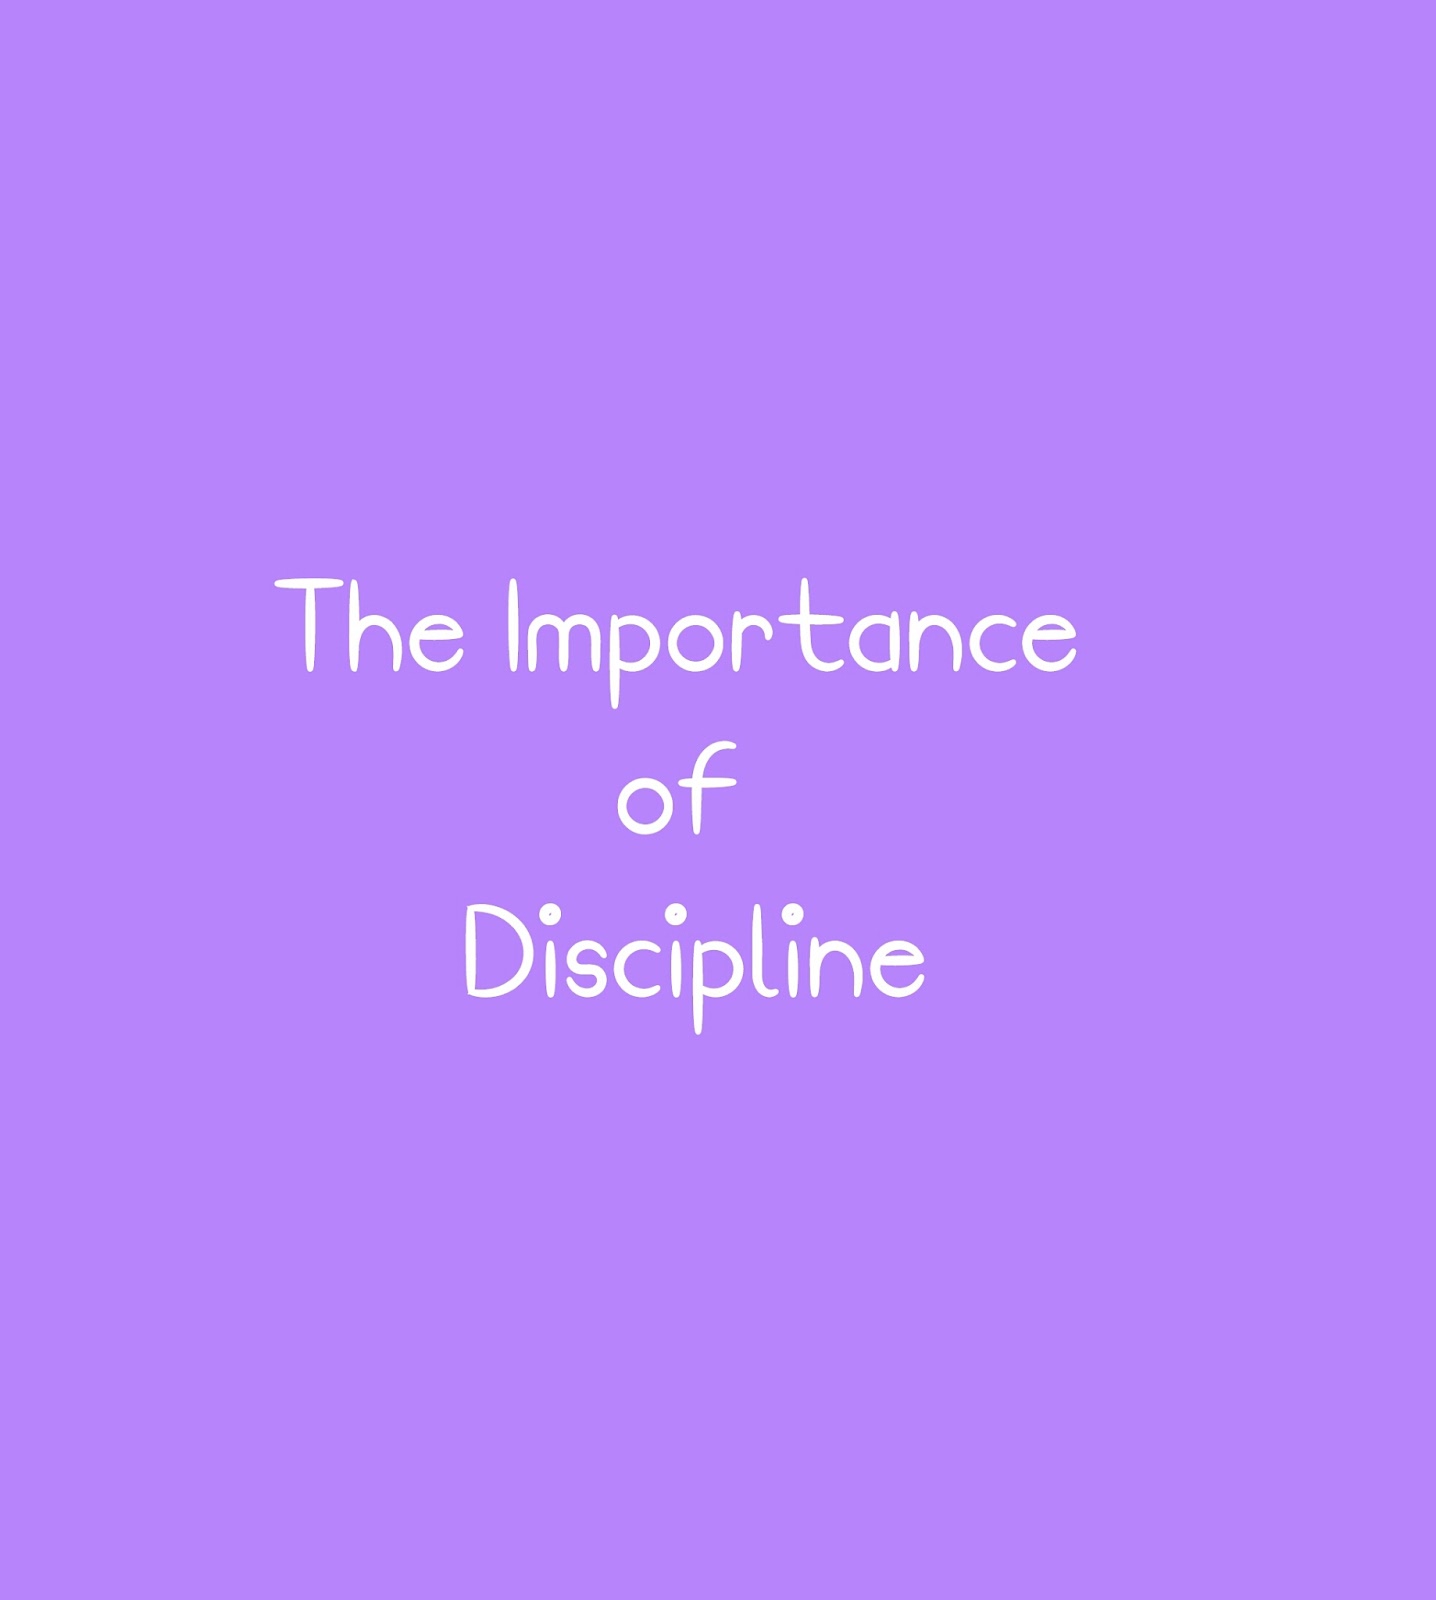 What is the importance of discipline in life?